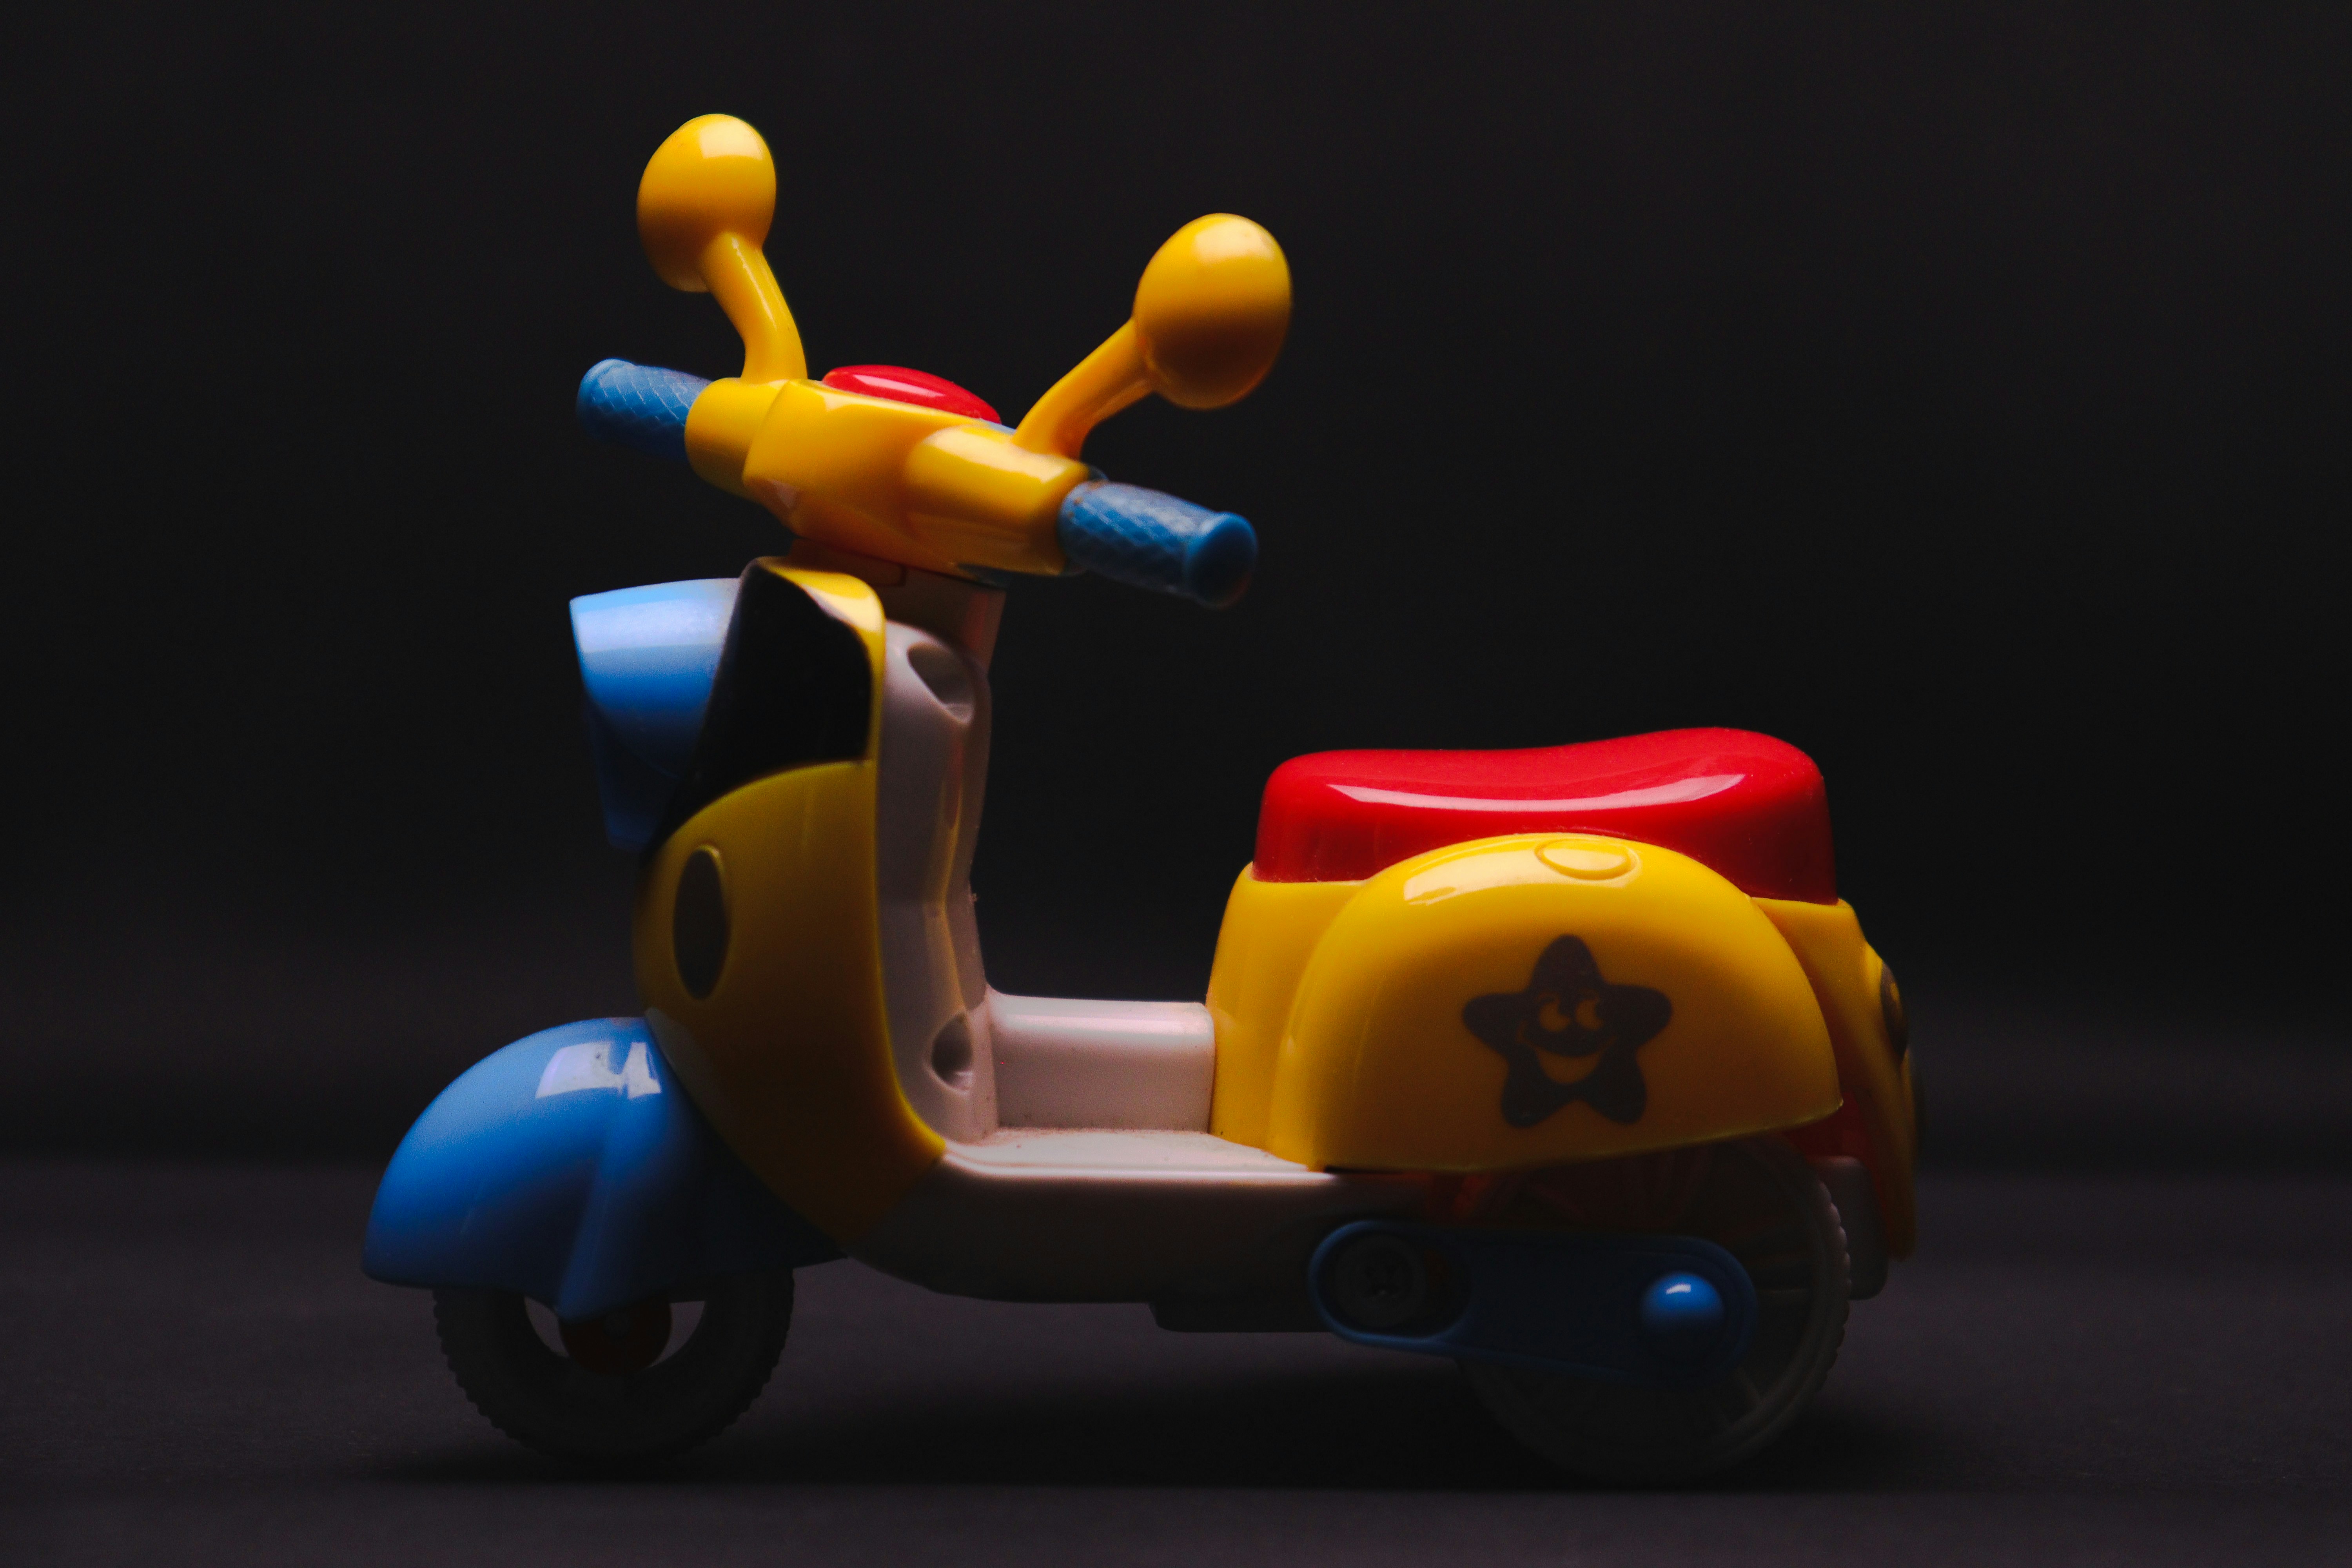 Choose from a curated selection of toys photos. Every picture of toys are always free on Unsplash.